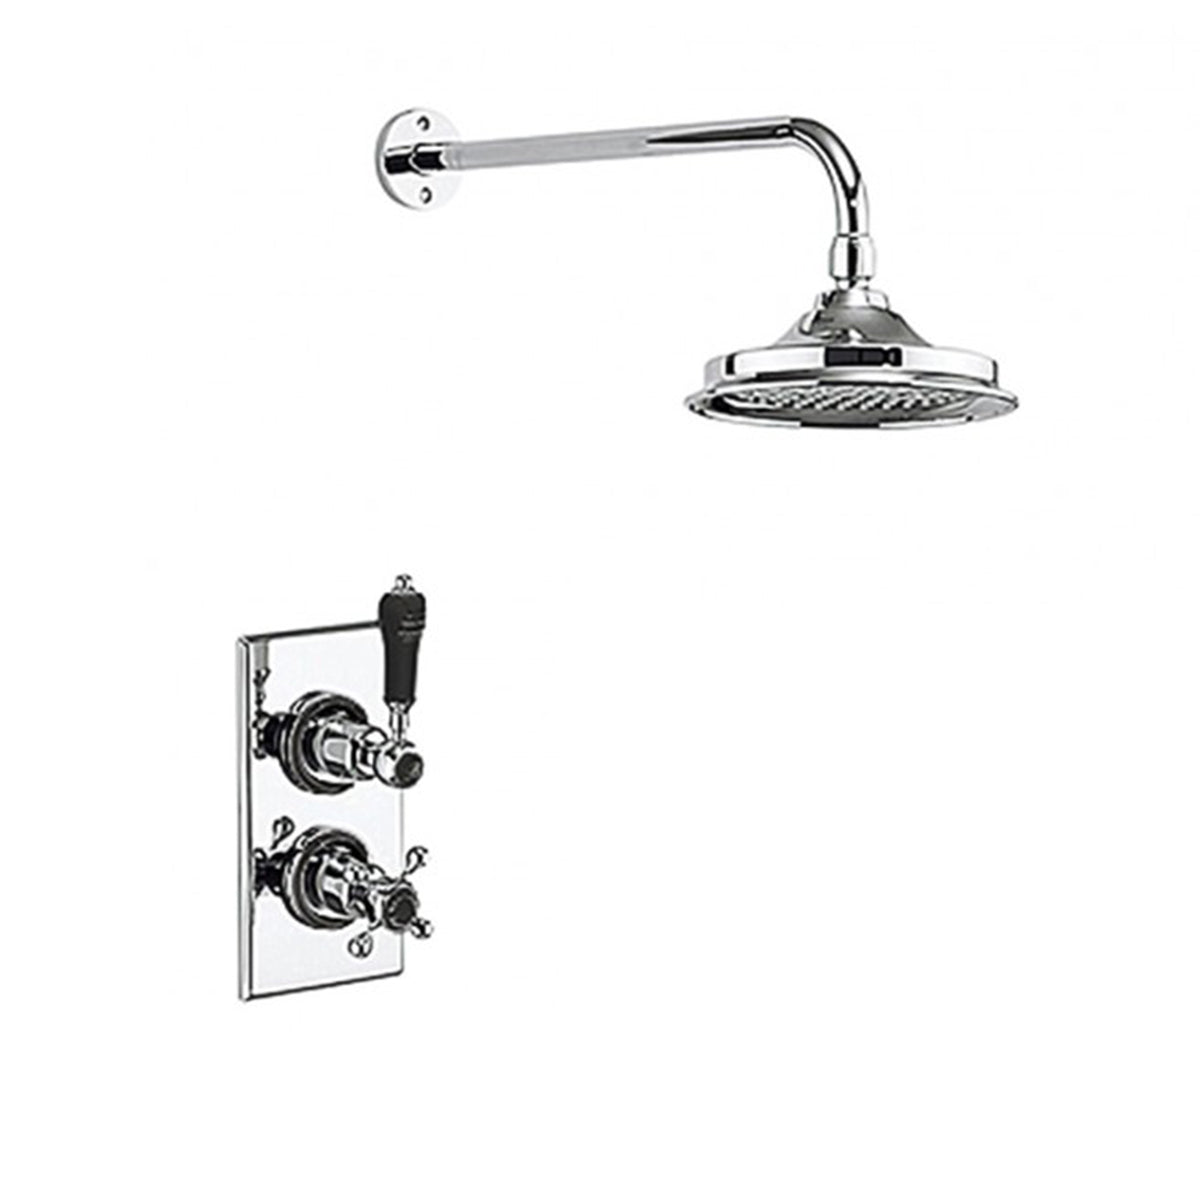 Burlington Trent Thermostatic Single Outlet Shower Valve with Fixed Shower Head Deluxe Bathrooms UK